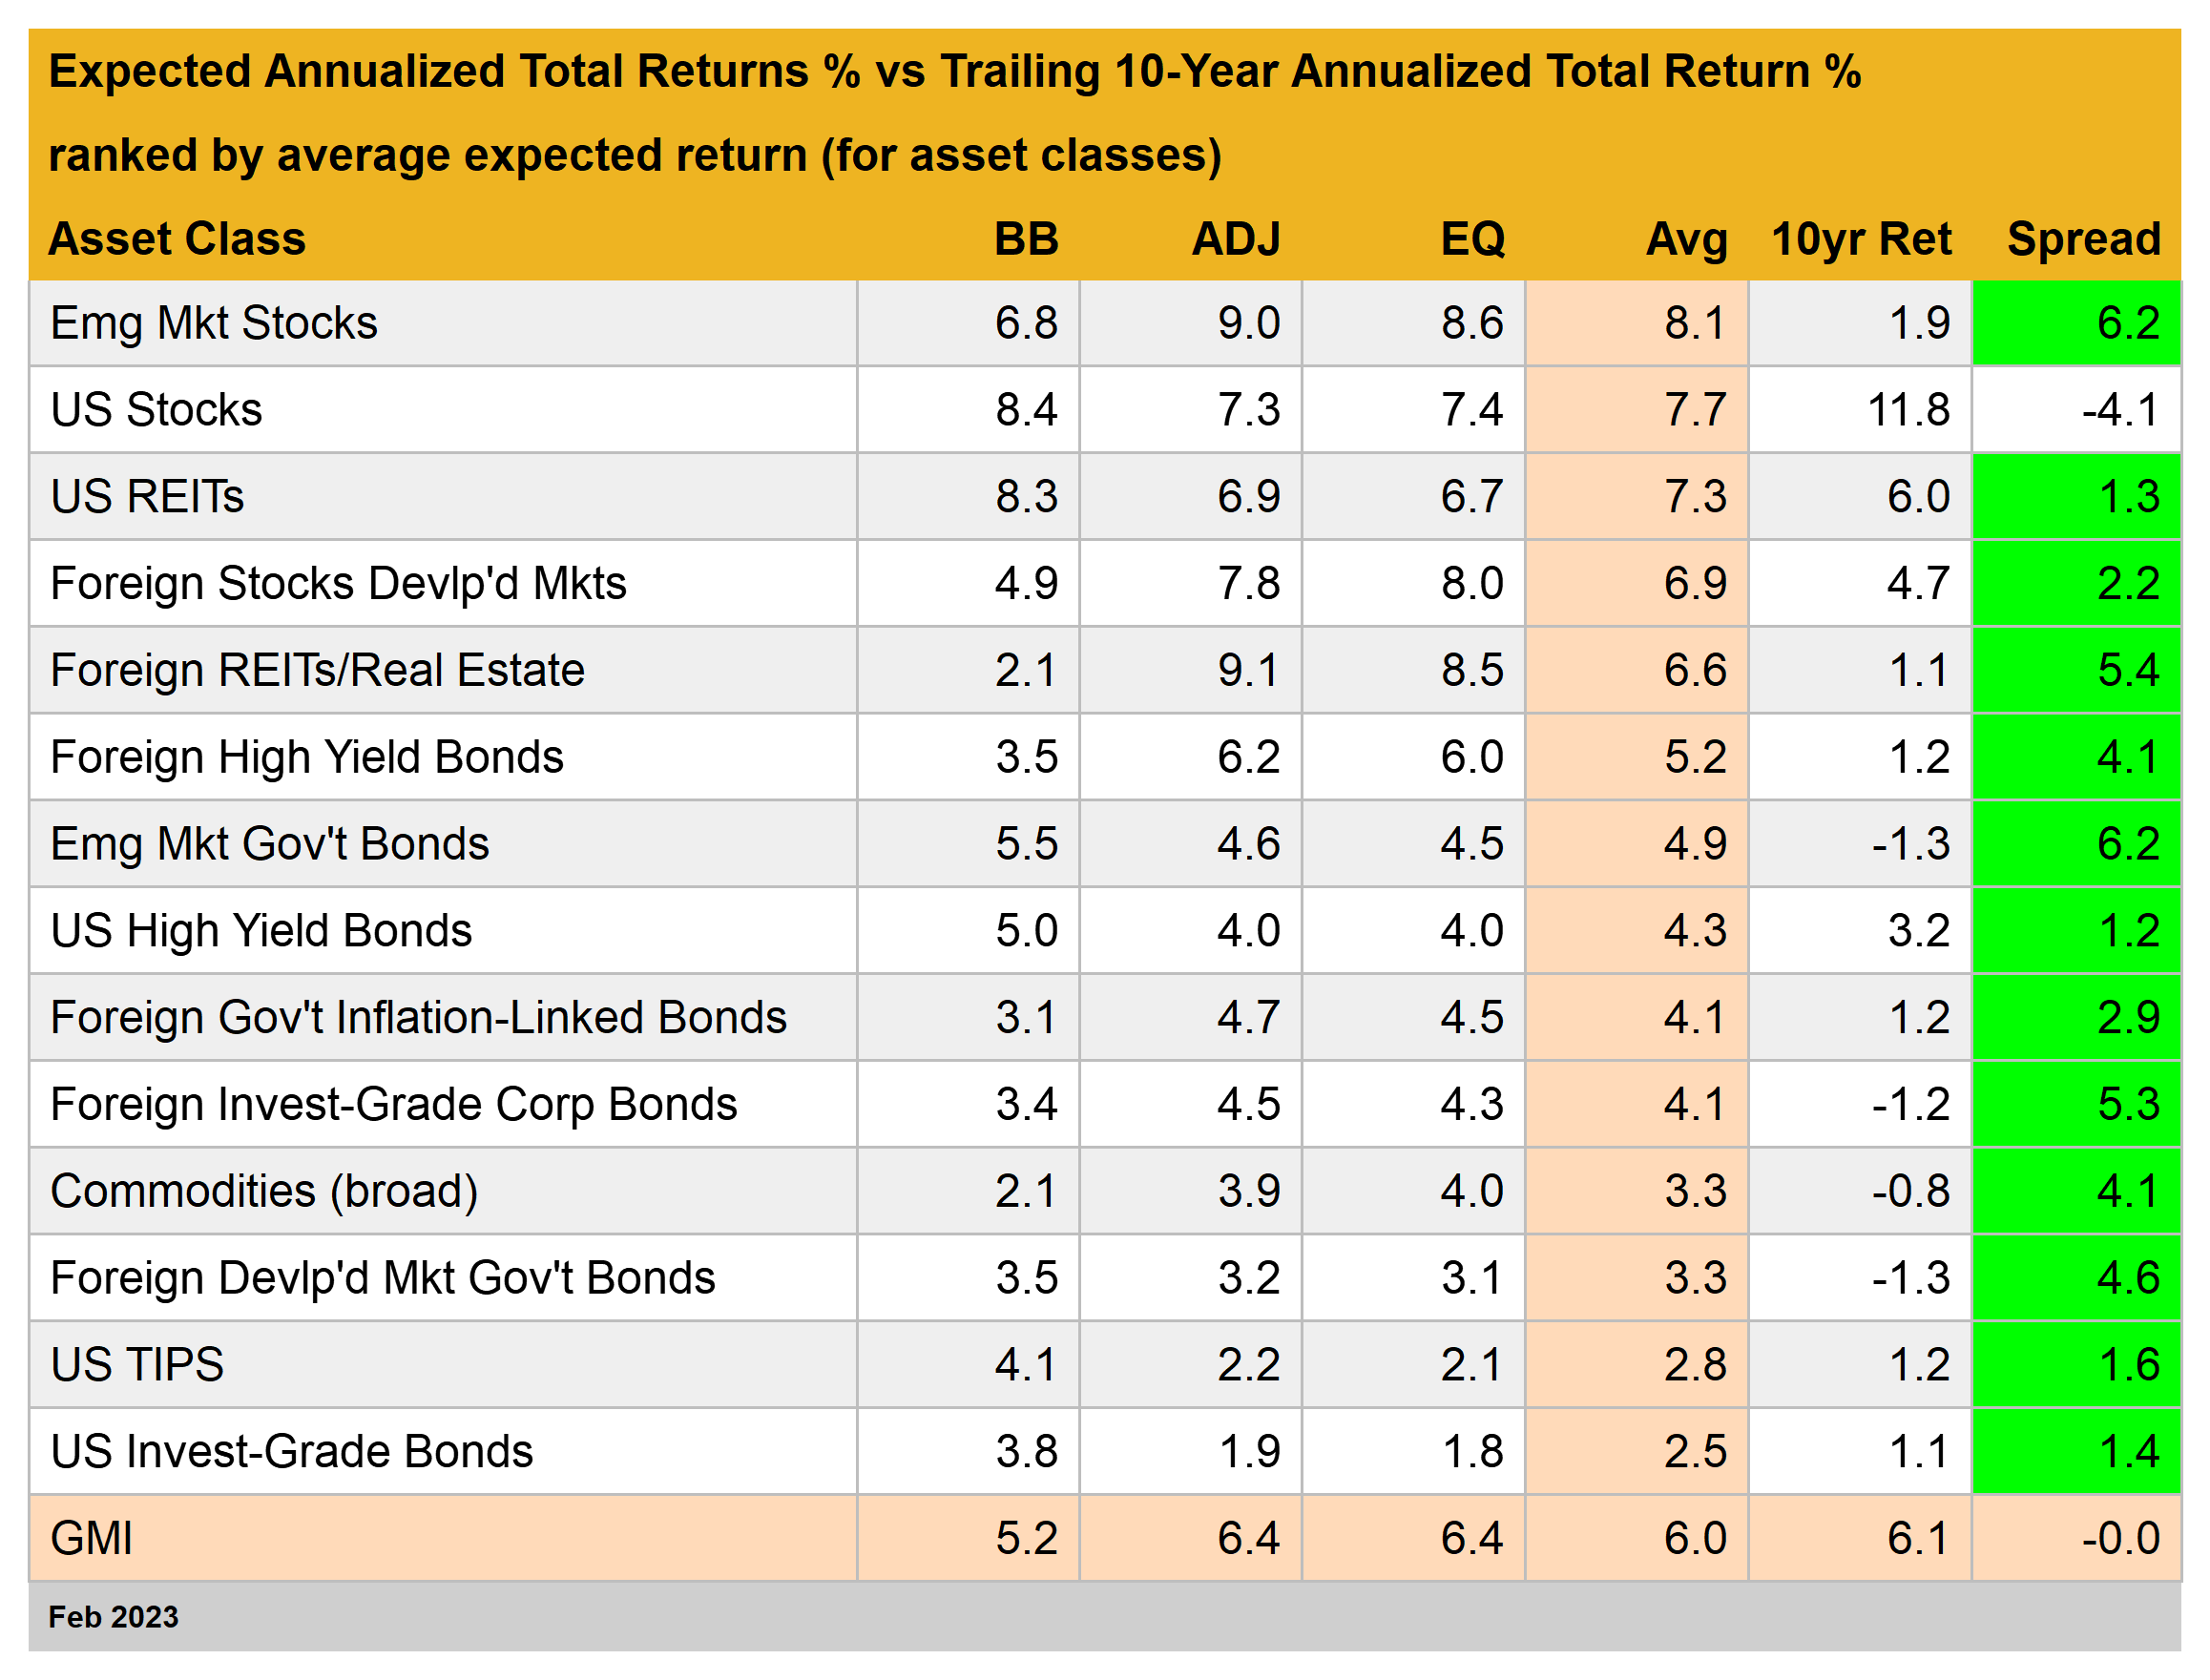 Expected vs Trailing Annualized Total Returns